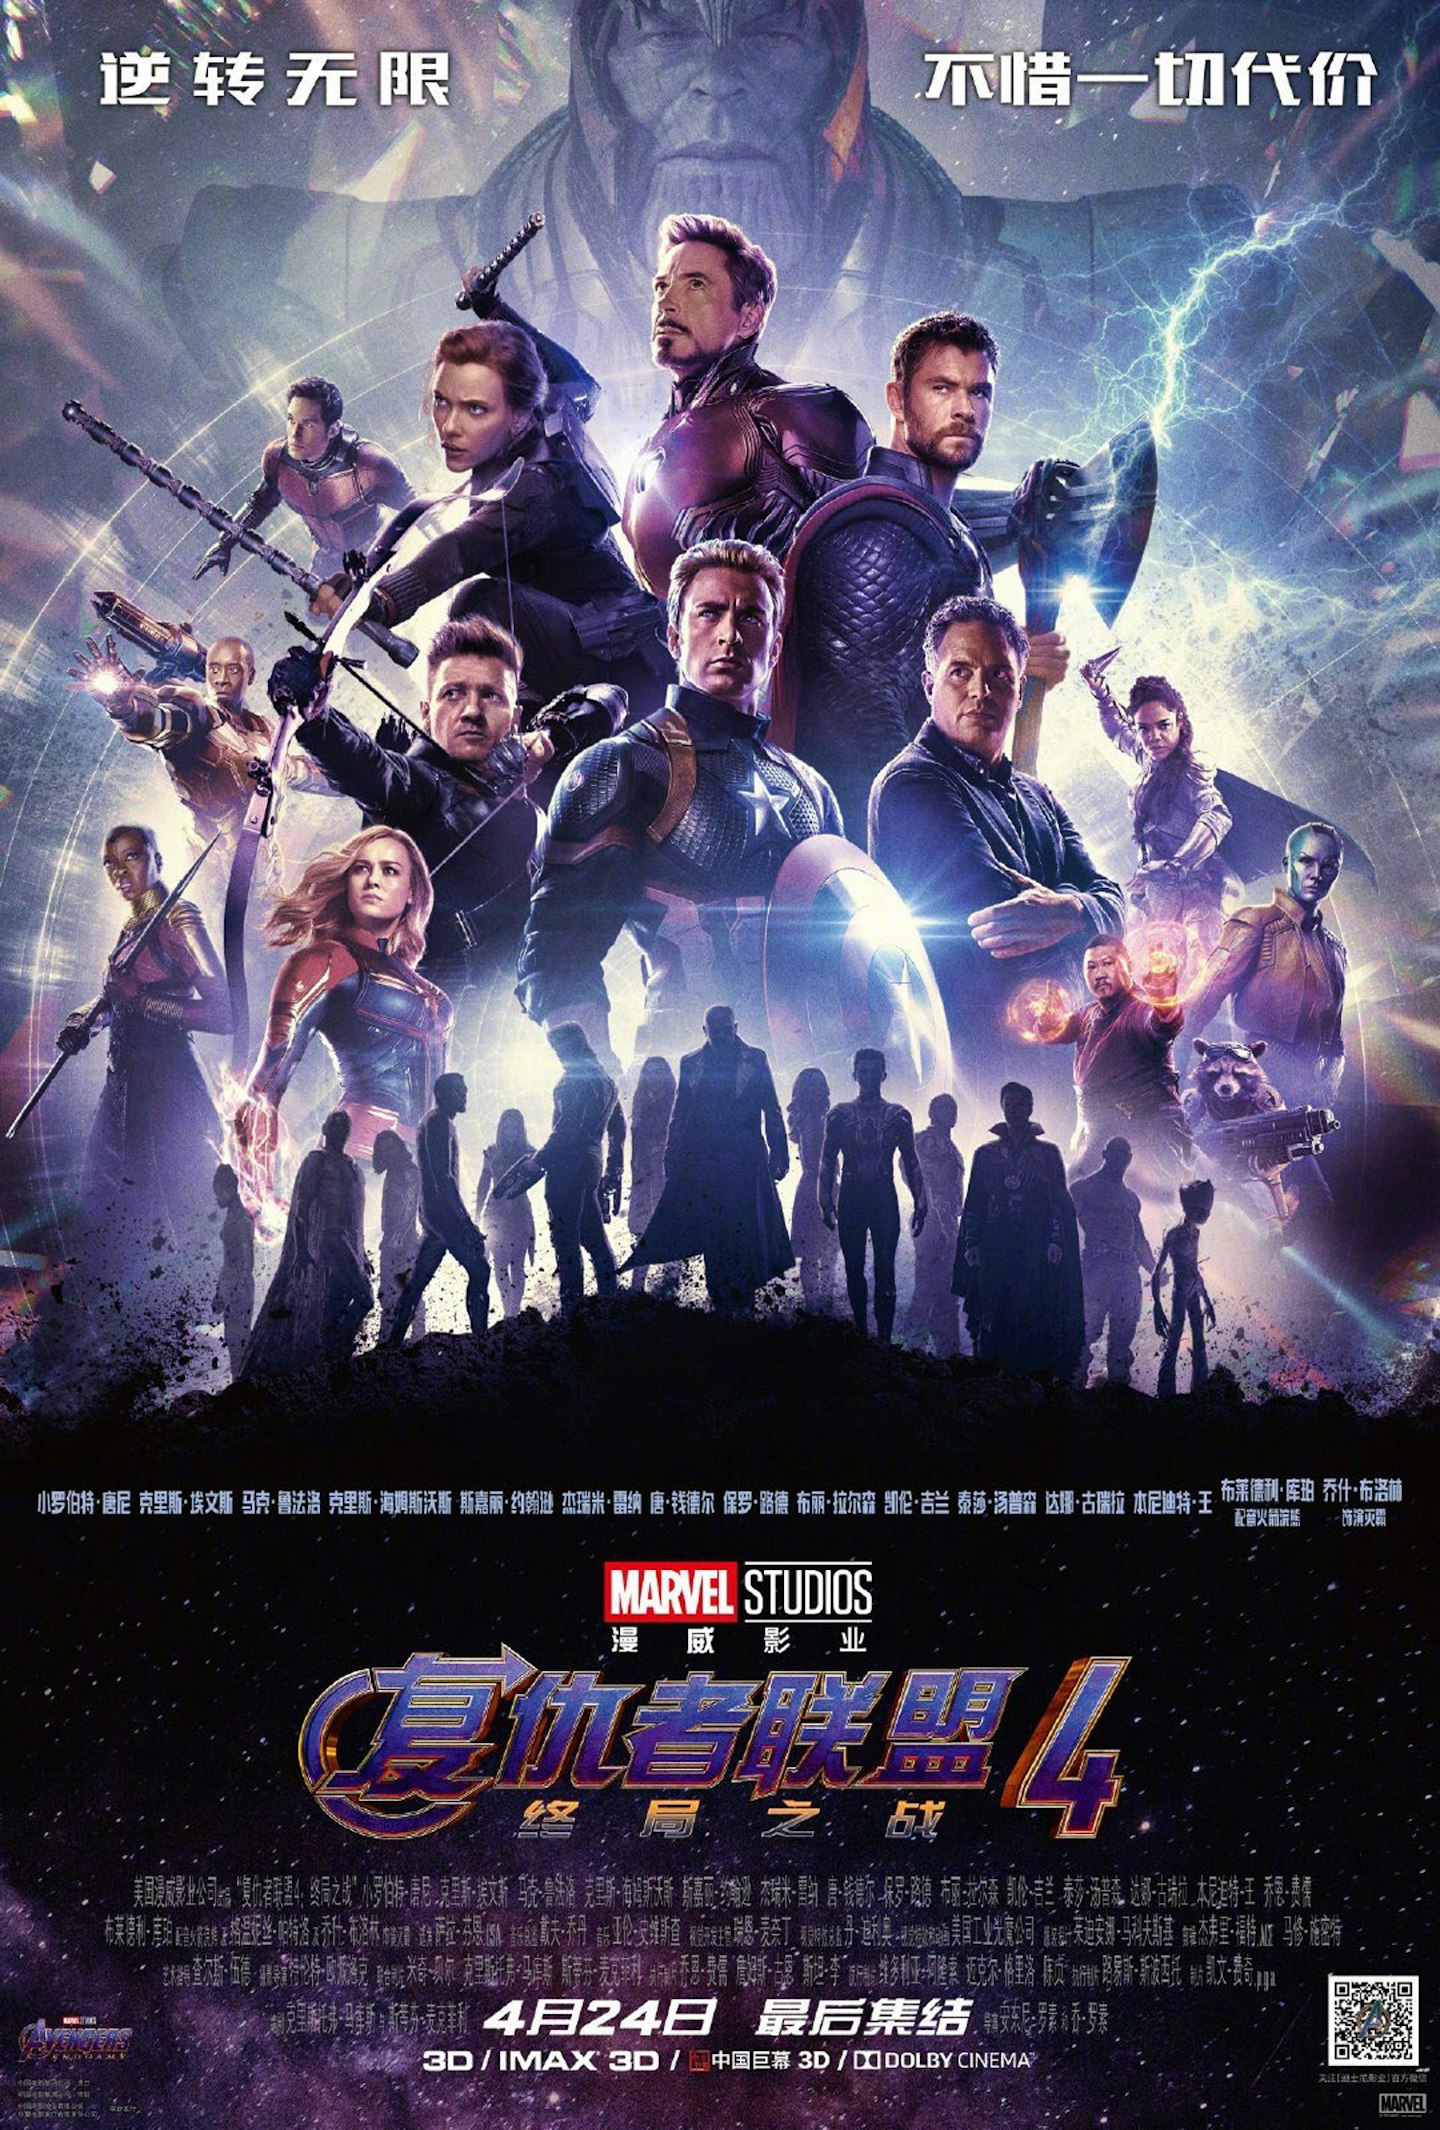 Black Widow takes the lead in Marvel's Avengers: Endgame Russia poster